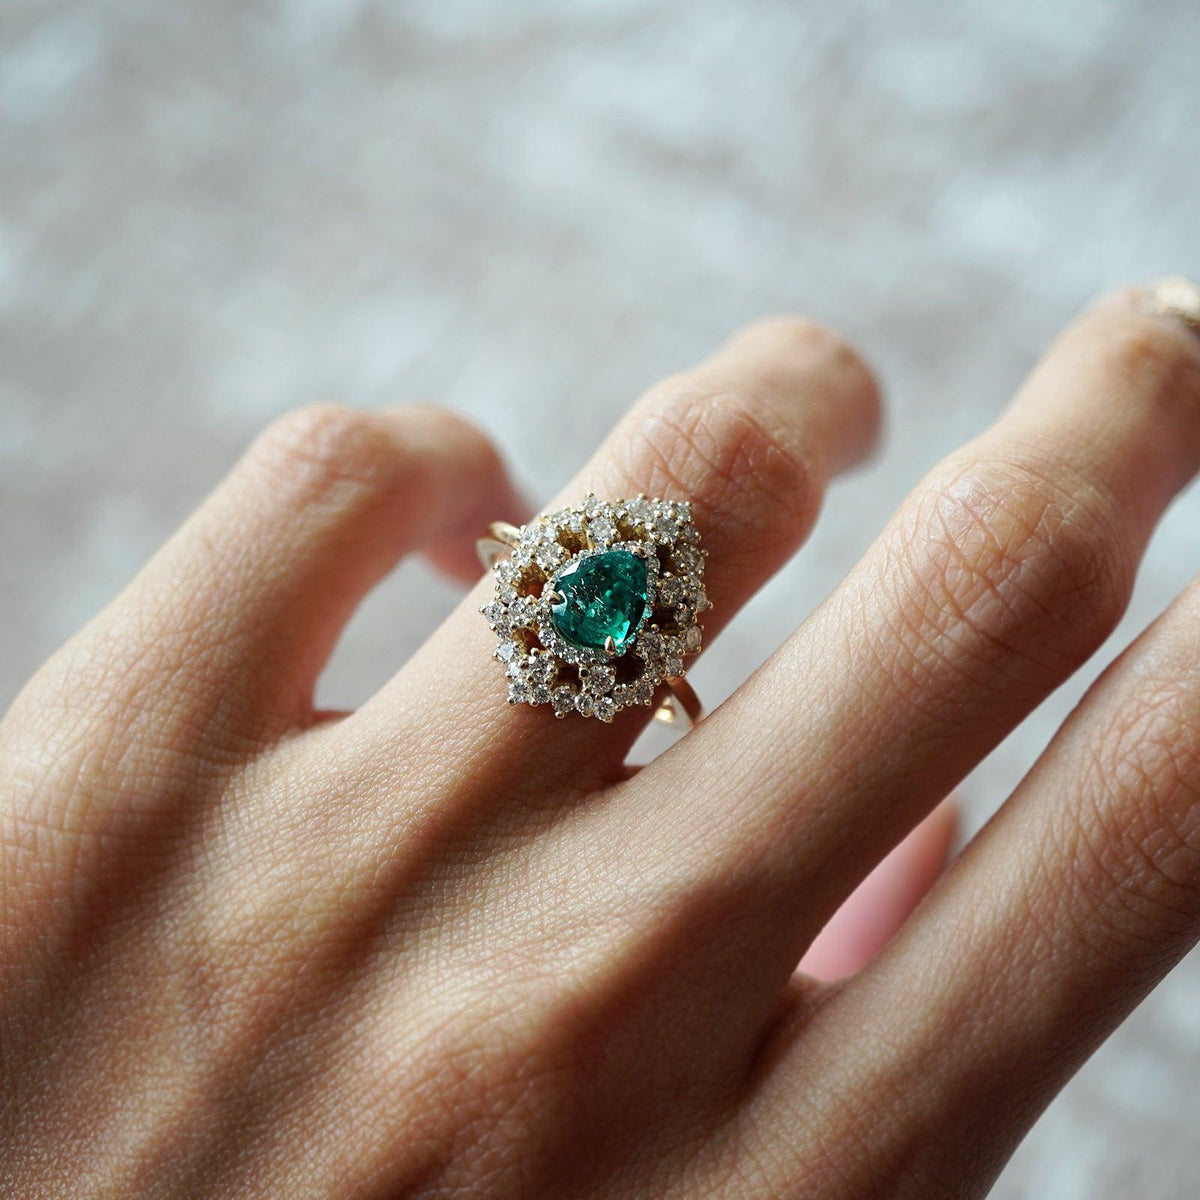 Forest Queen Emerald Diamond Ring in 14K and 18K Gold - Tippy Taste Jewelry